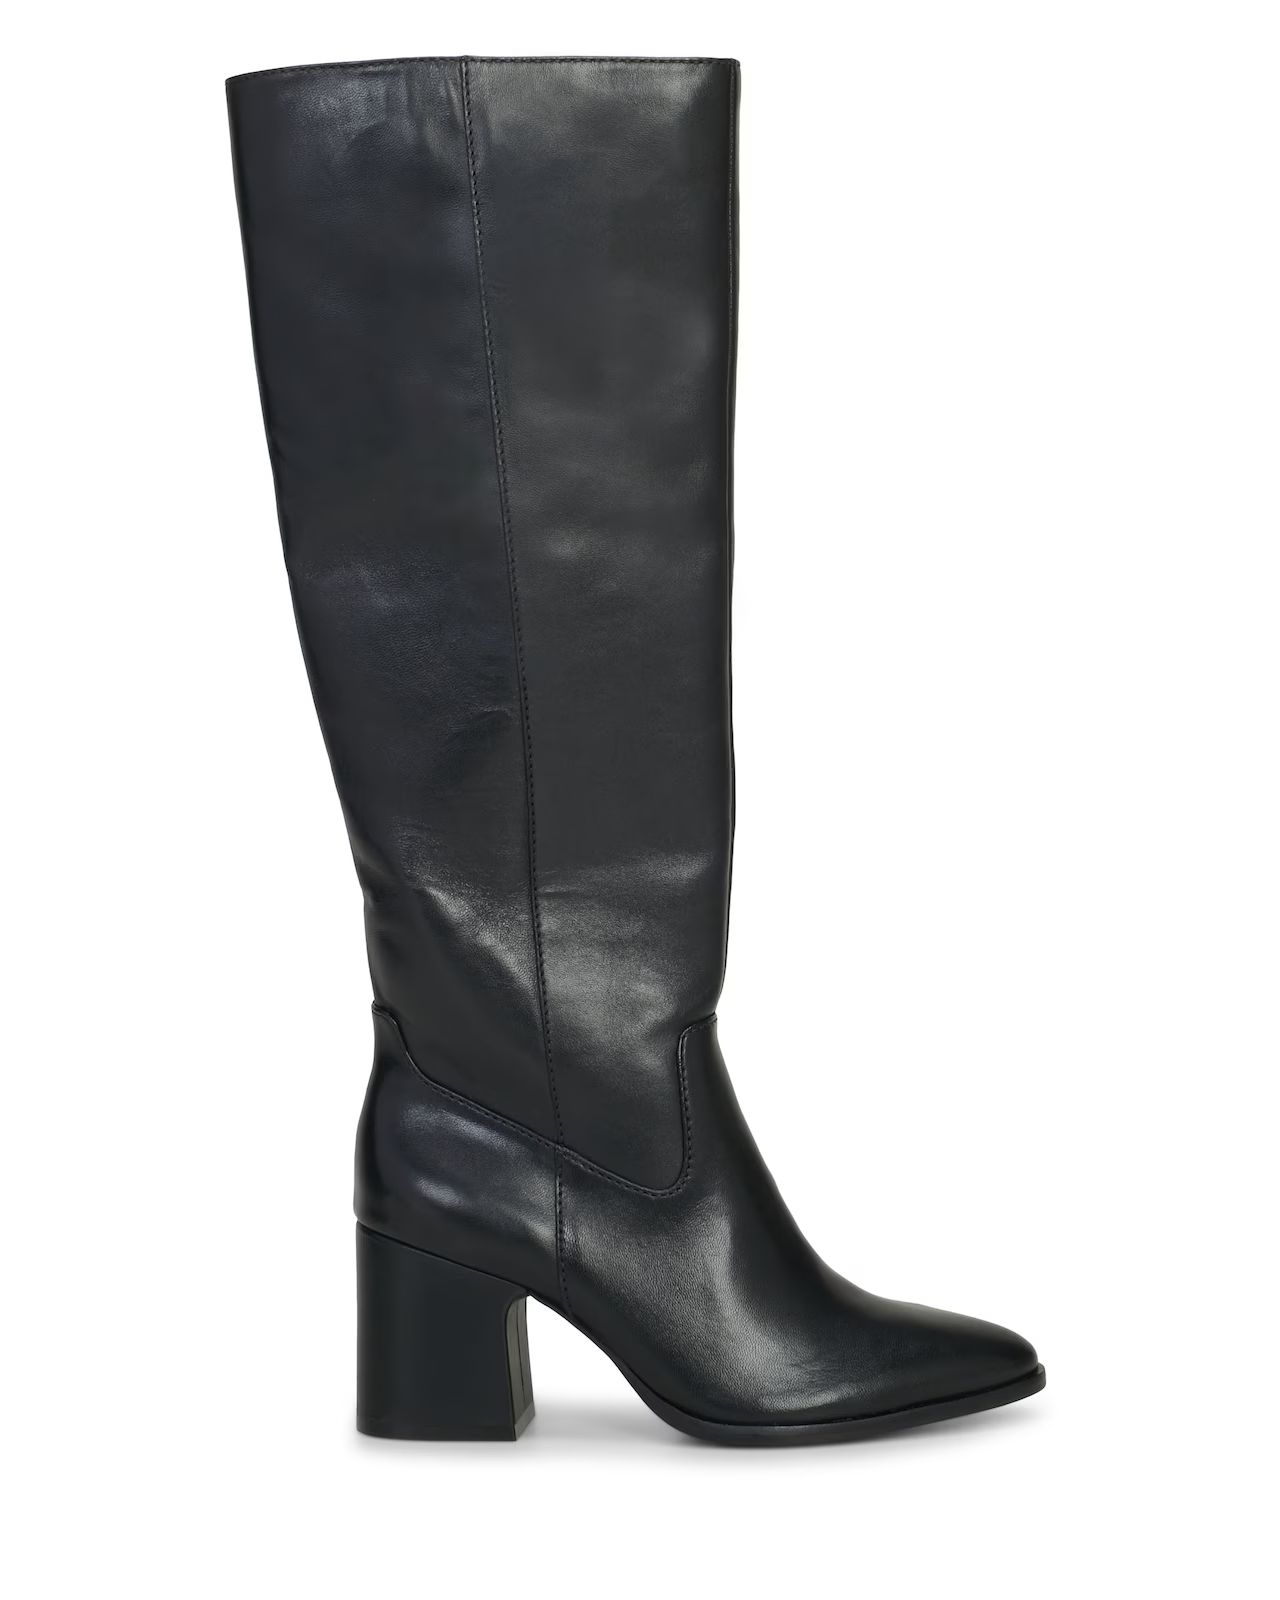 Vince Camuto Evronna Wide-calf Boot | Vince Camuto